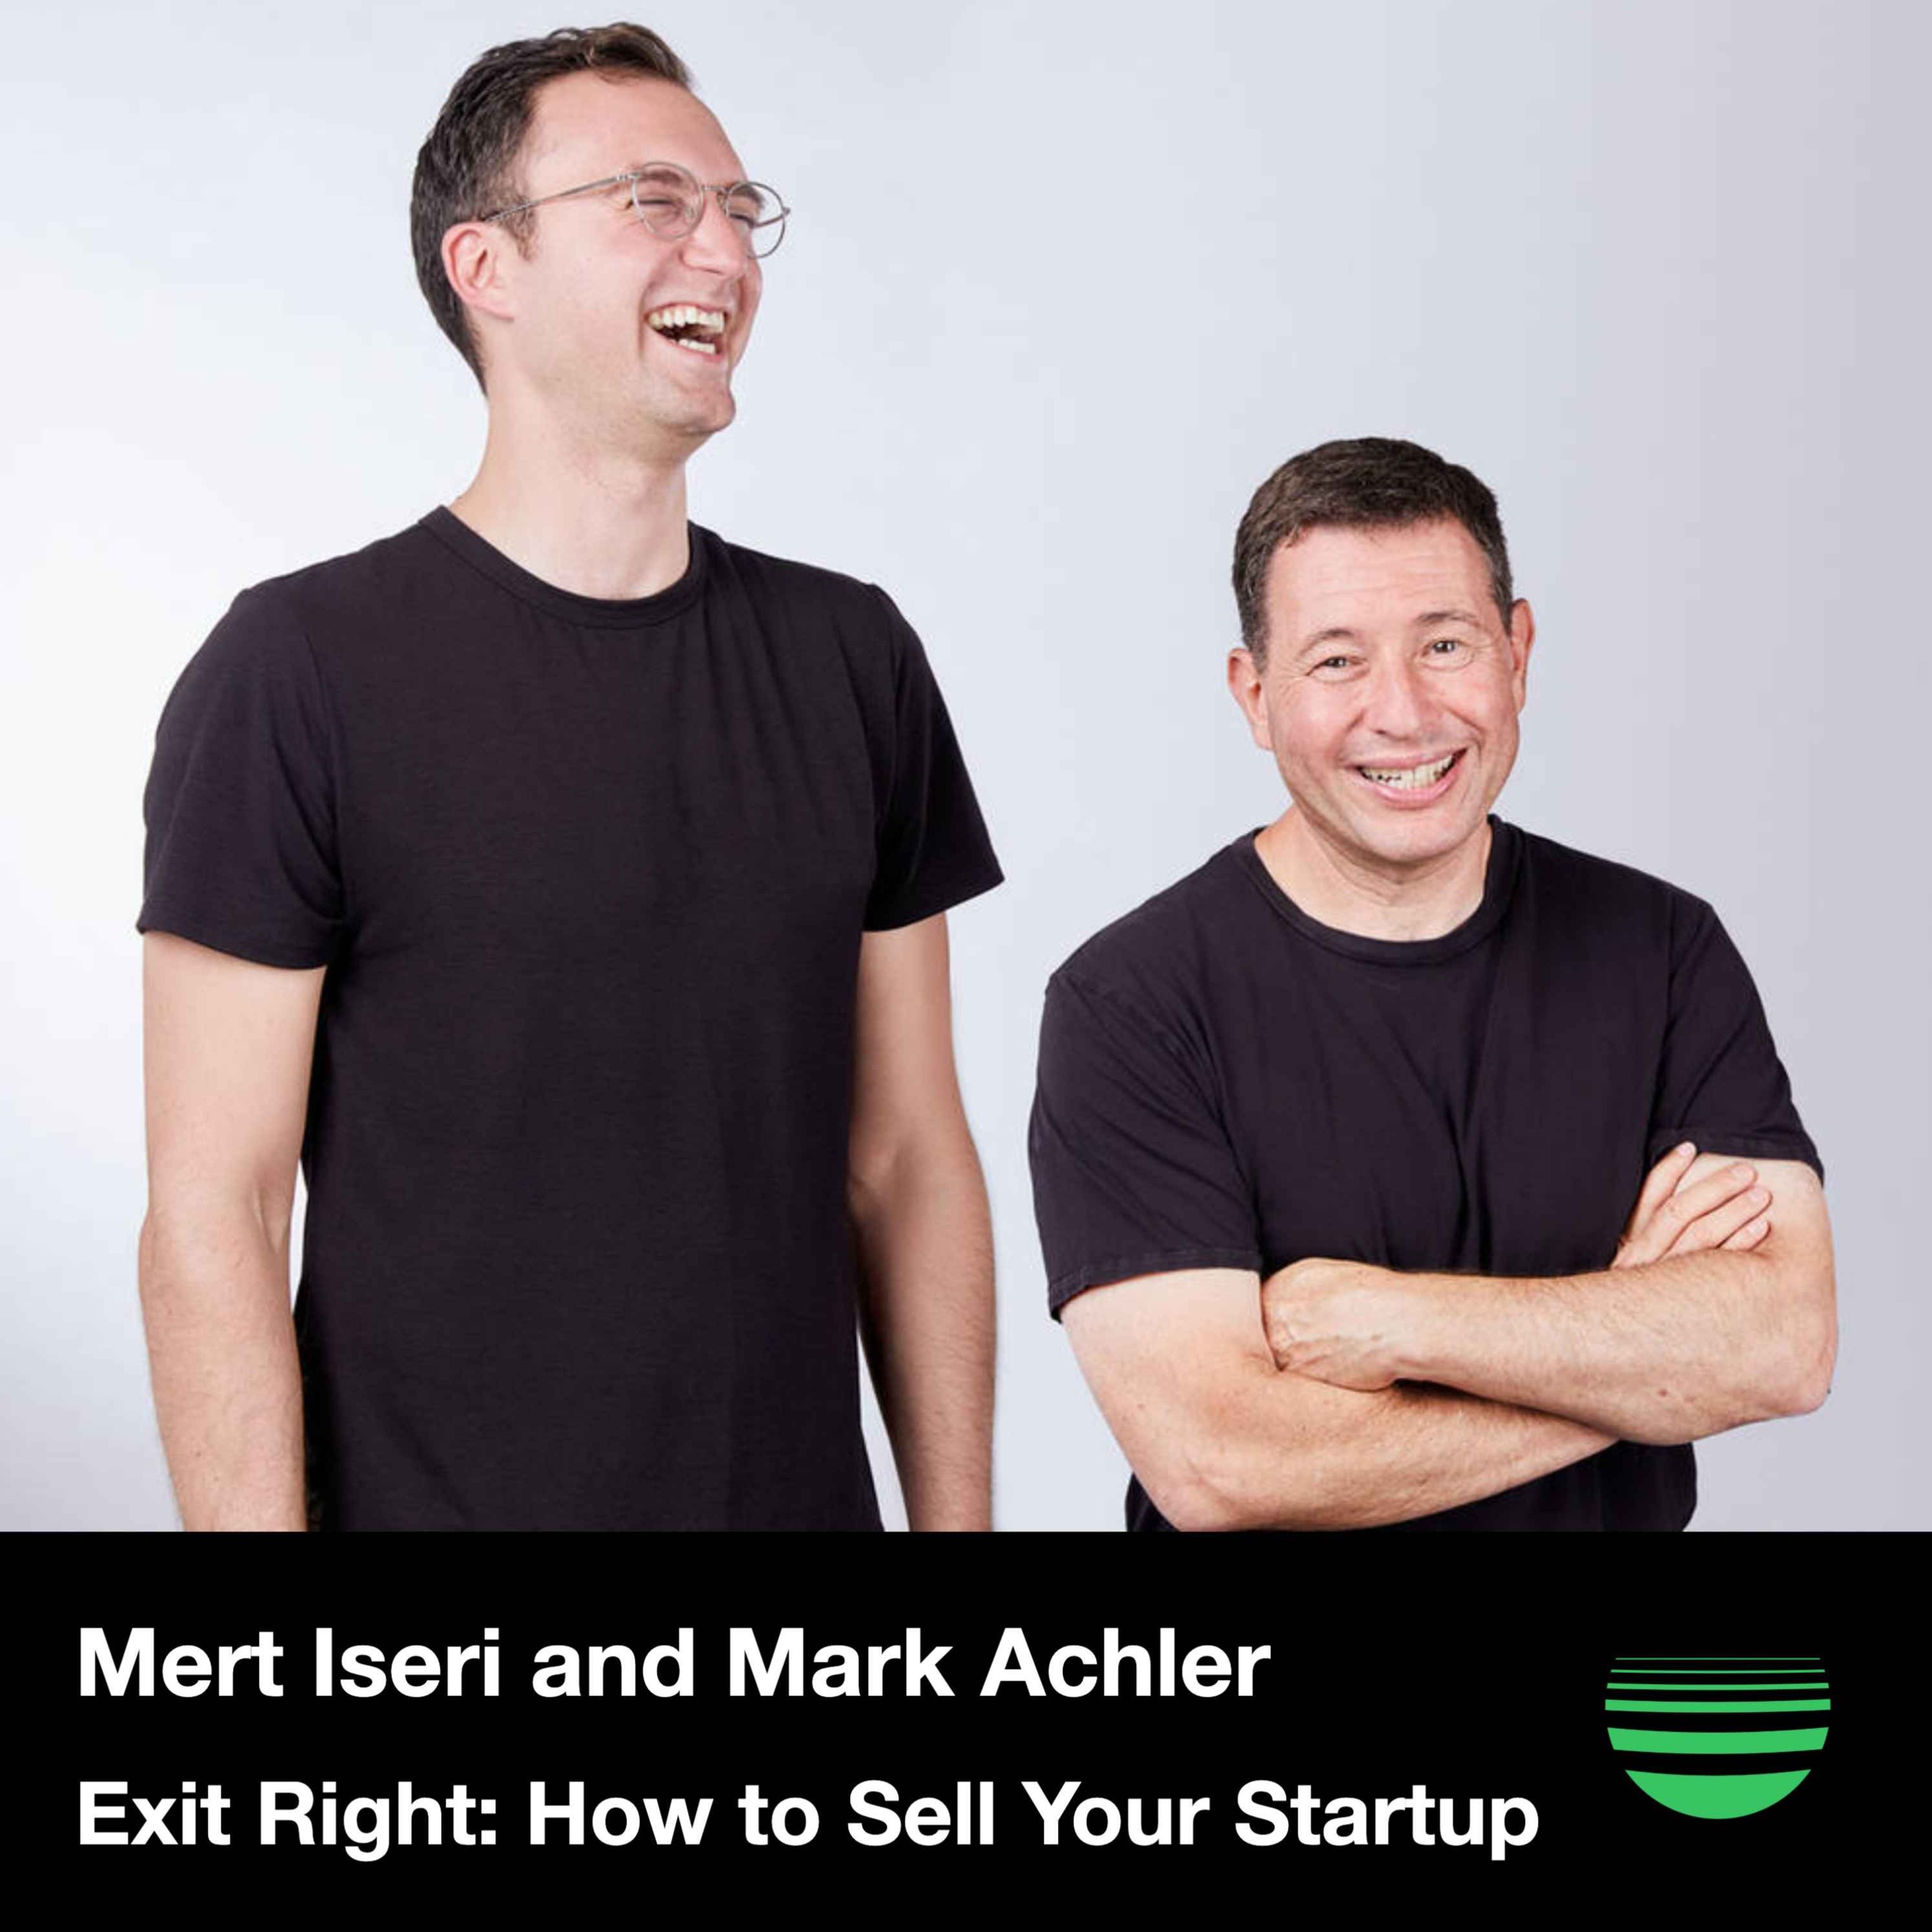 Authors Mark Achler and Mert Iseri on Exit Strategy and Building Your Legacy